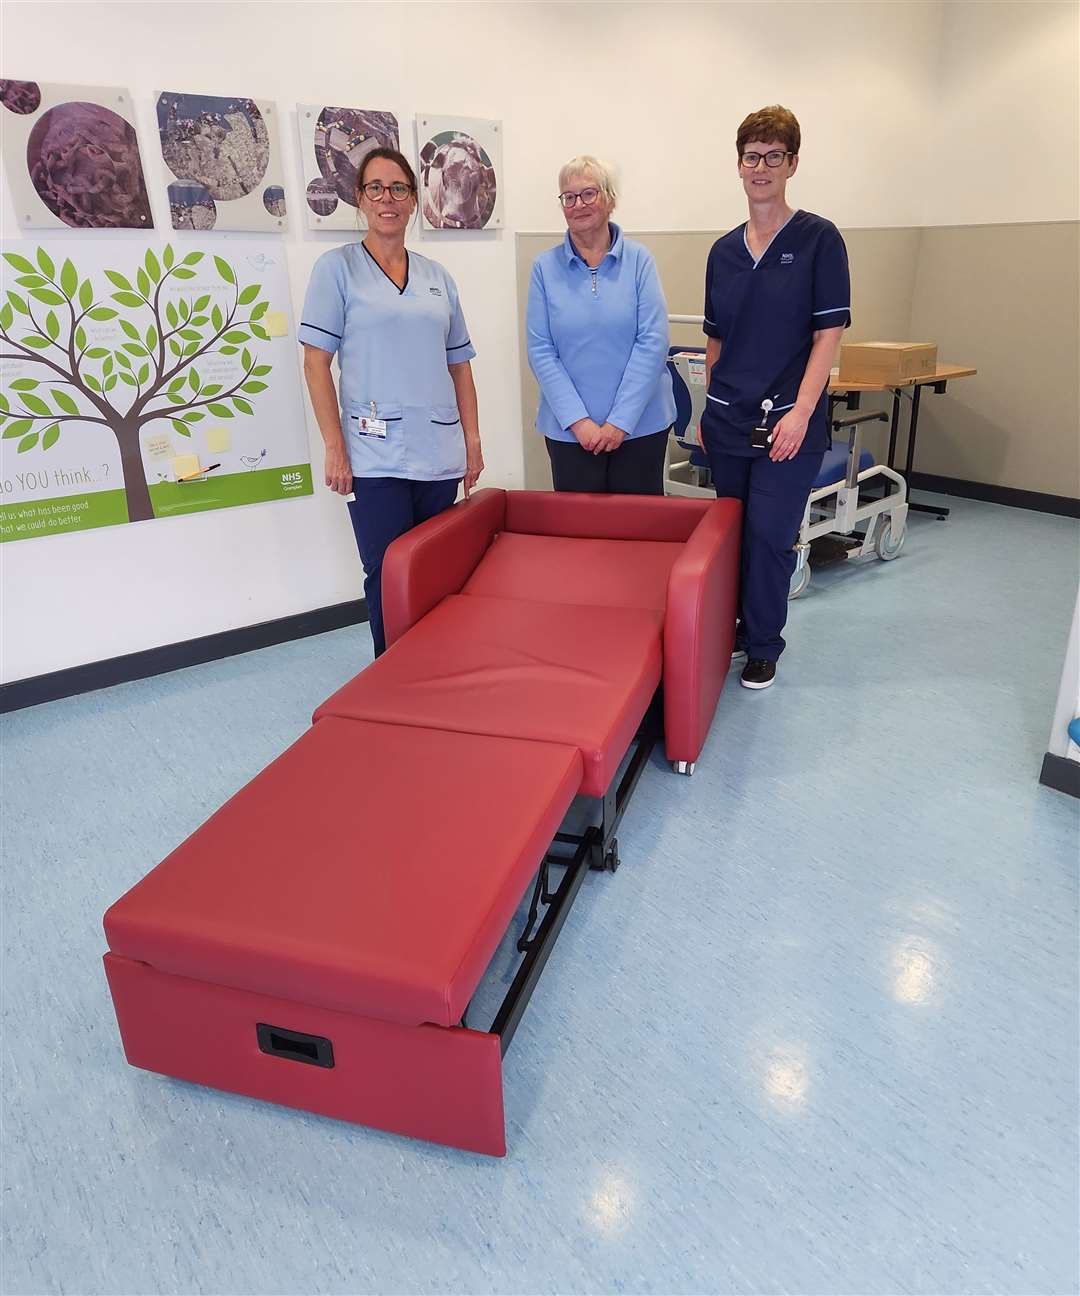 A dialysis chair has also been supplied by the Friends of Chalmers Hospital.